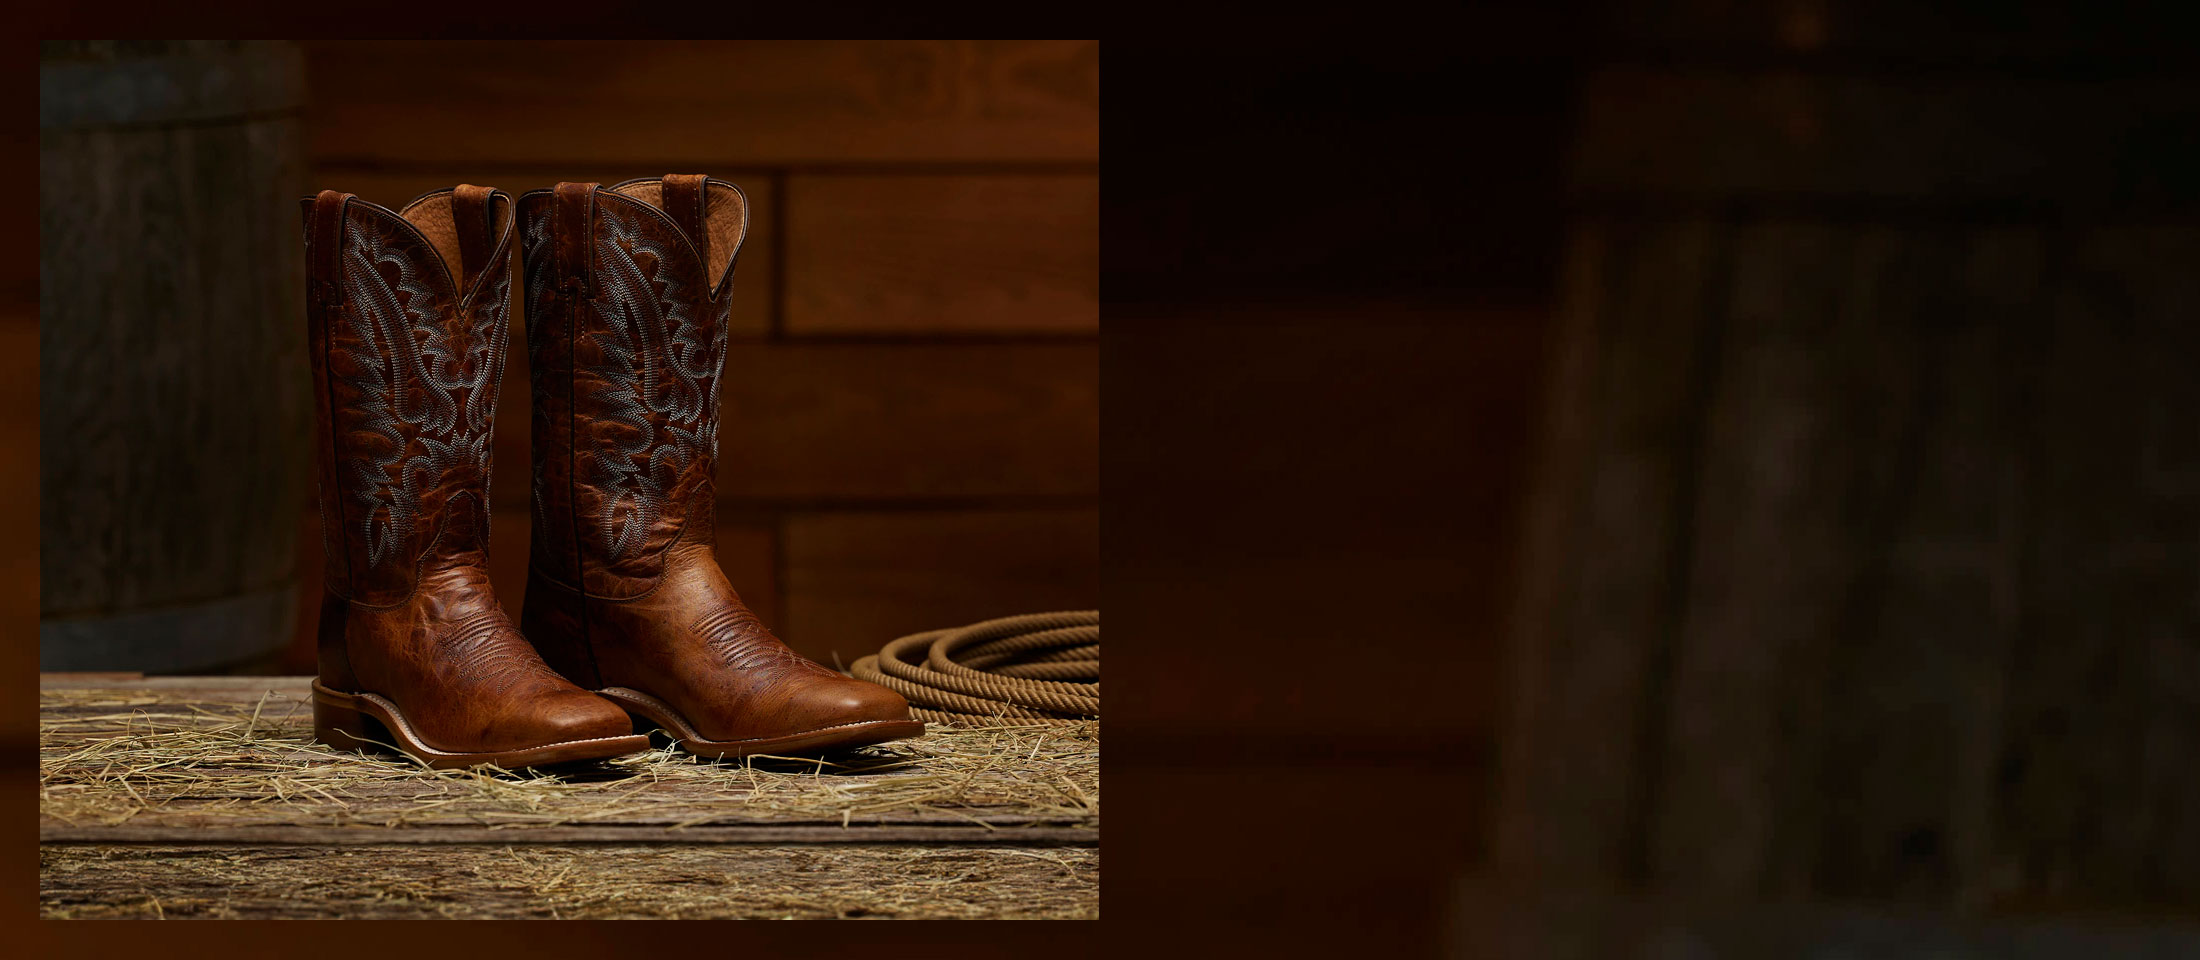 The Justin women's Peyton Bent Rail western boot shown in amber brown.